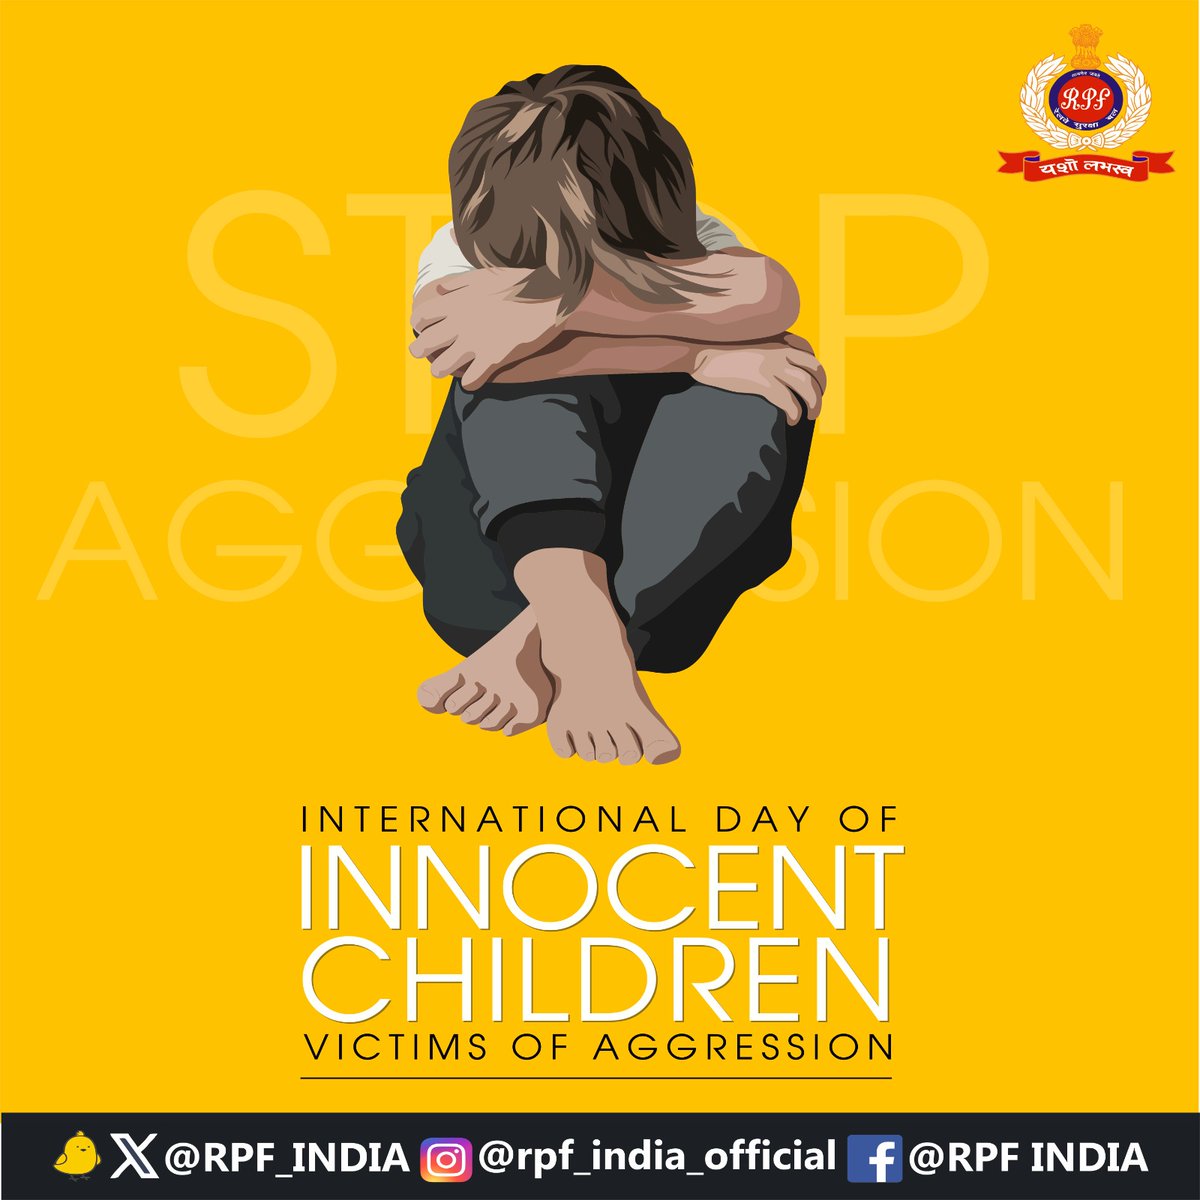 On International Day of Innocent Children (Victims of Aggression), let's unite to shield the most vulnerable. If you spot any child in need of care & protection within railway premises, Reach out to #RPF or Railway #ChildHelpline immediately. #OperationNanheFarishte #Dial139